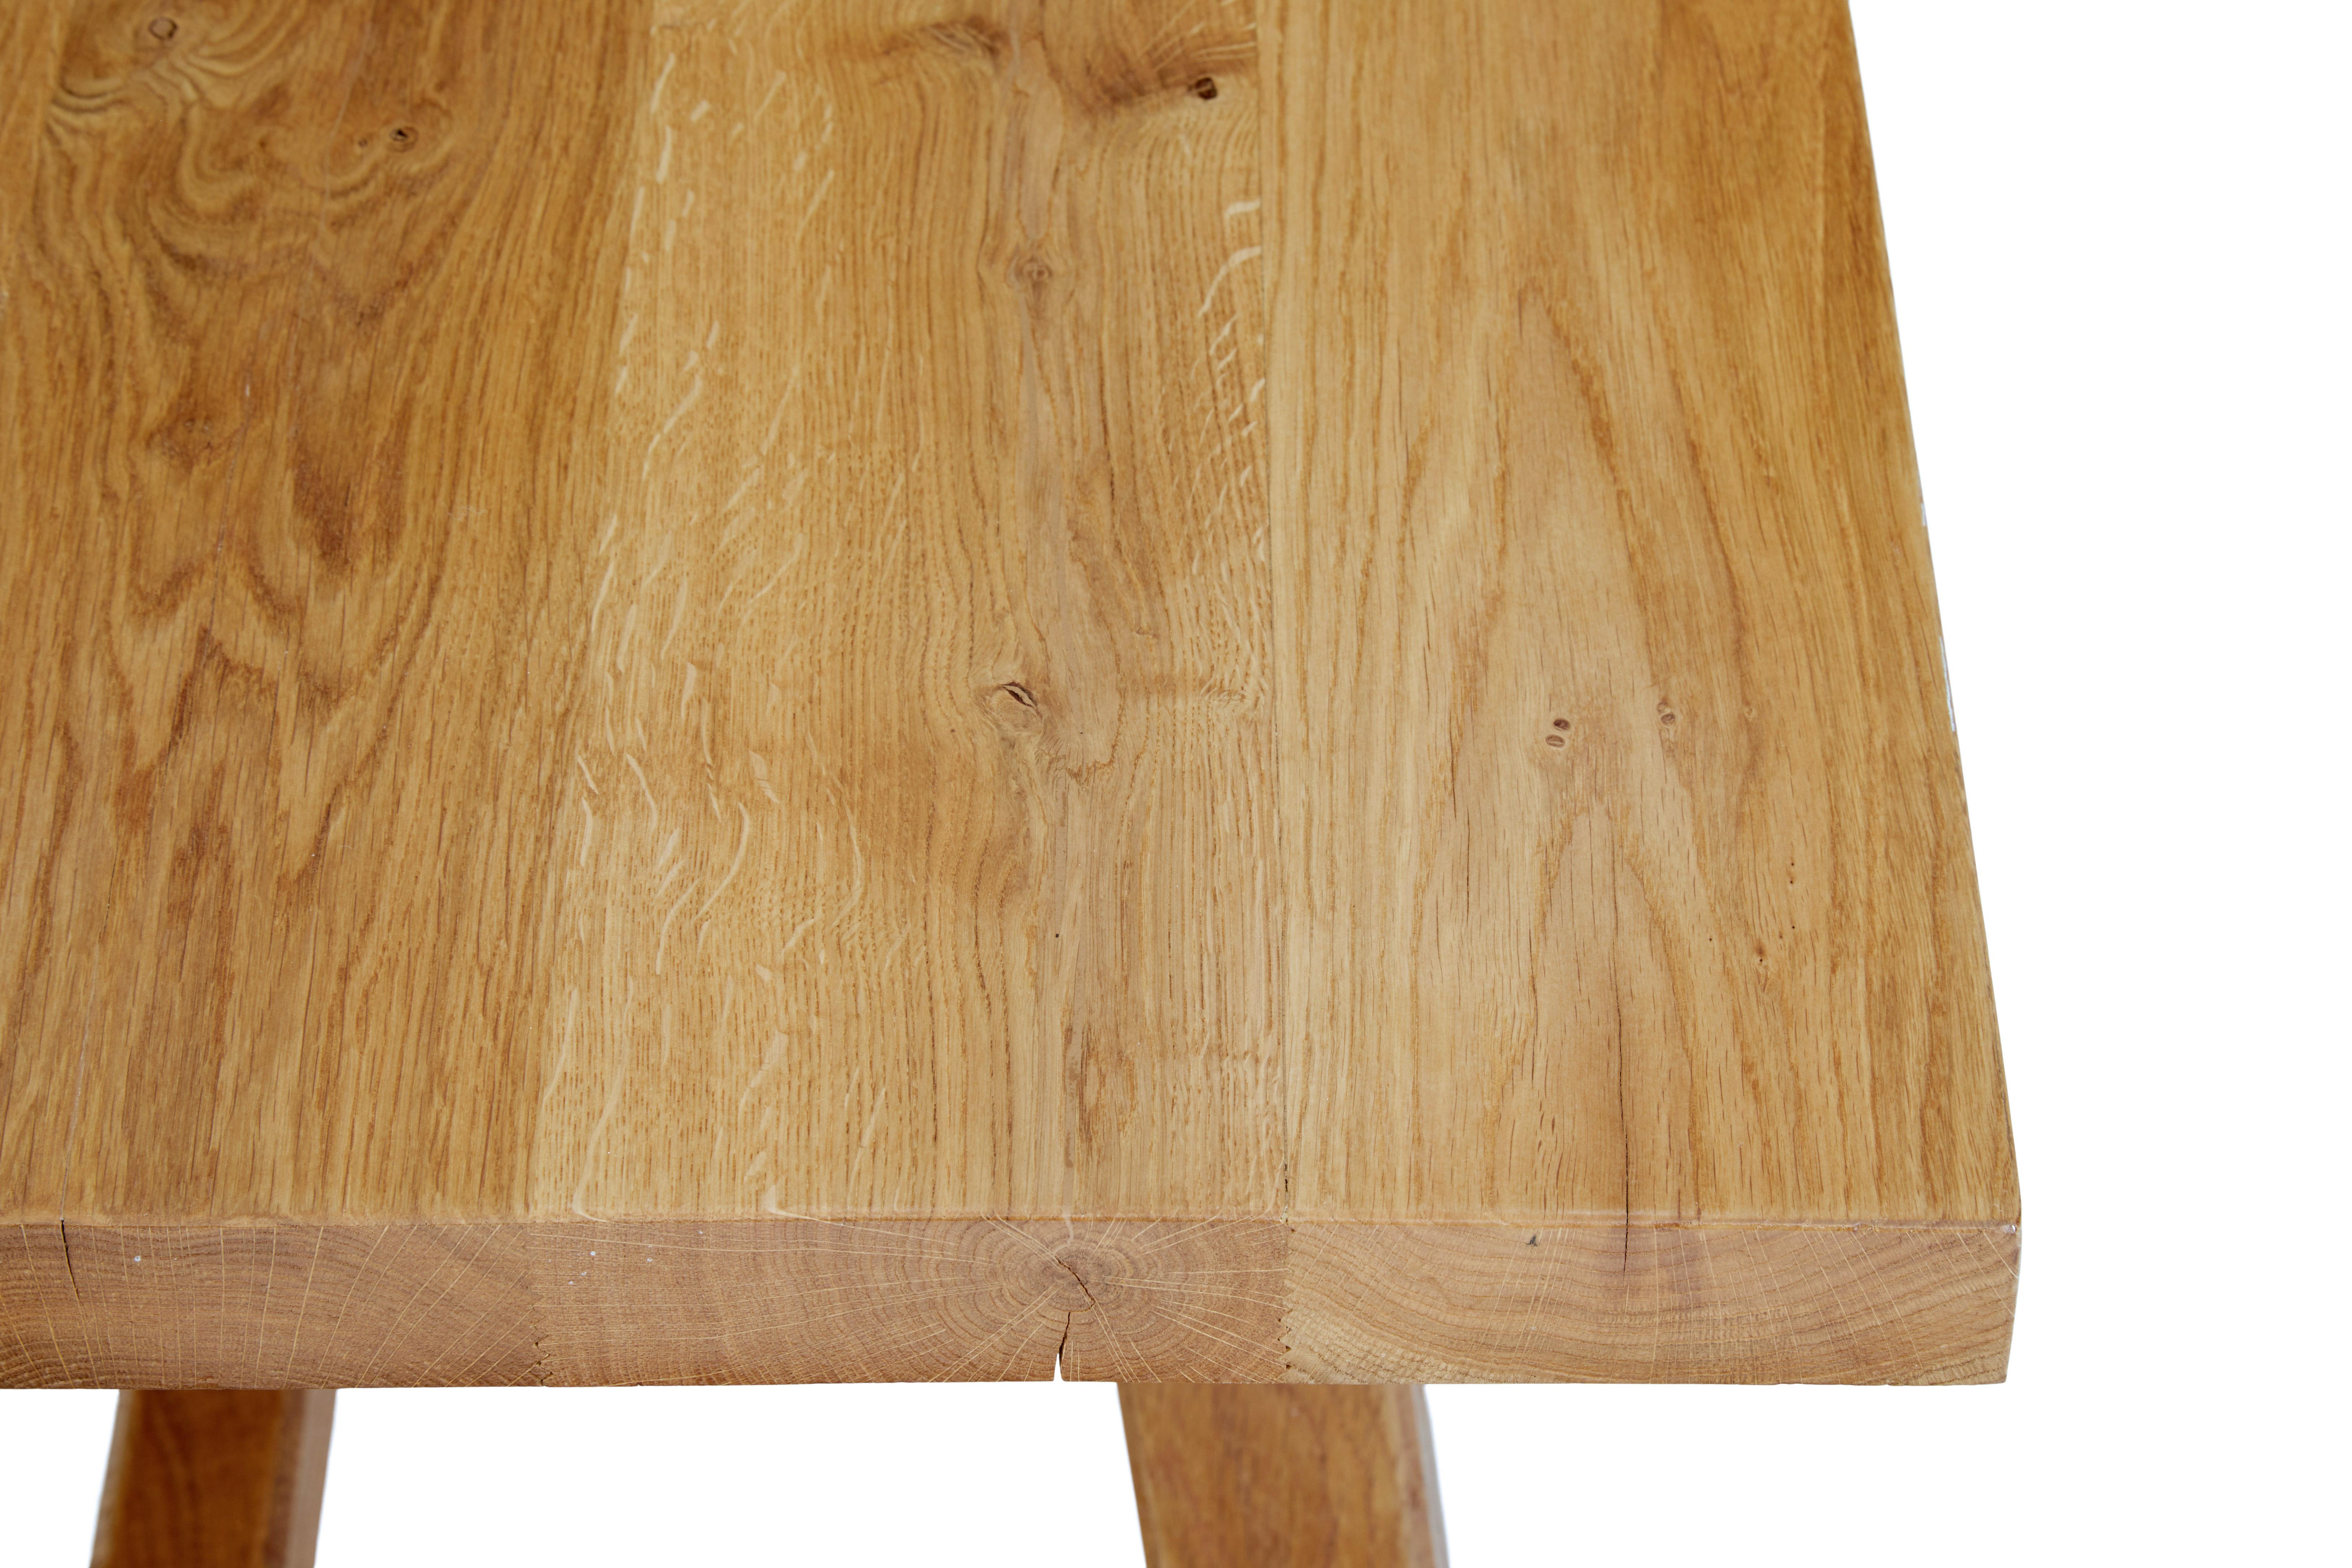 Hand-Crafted Impressive Solid Oak Dining Table and Benches by Garbo